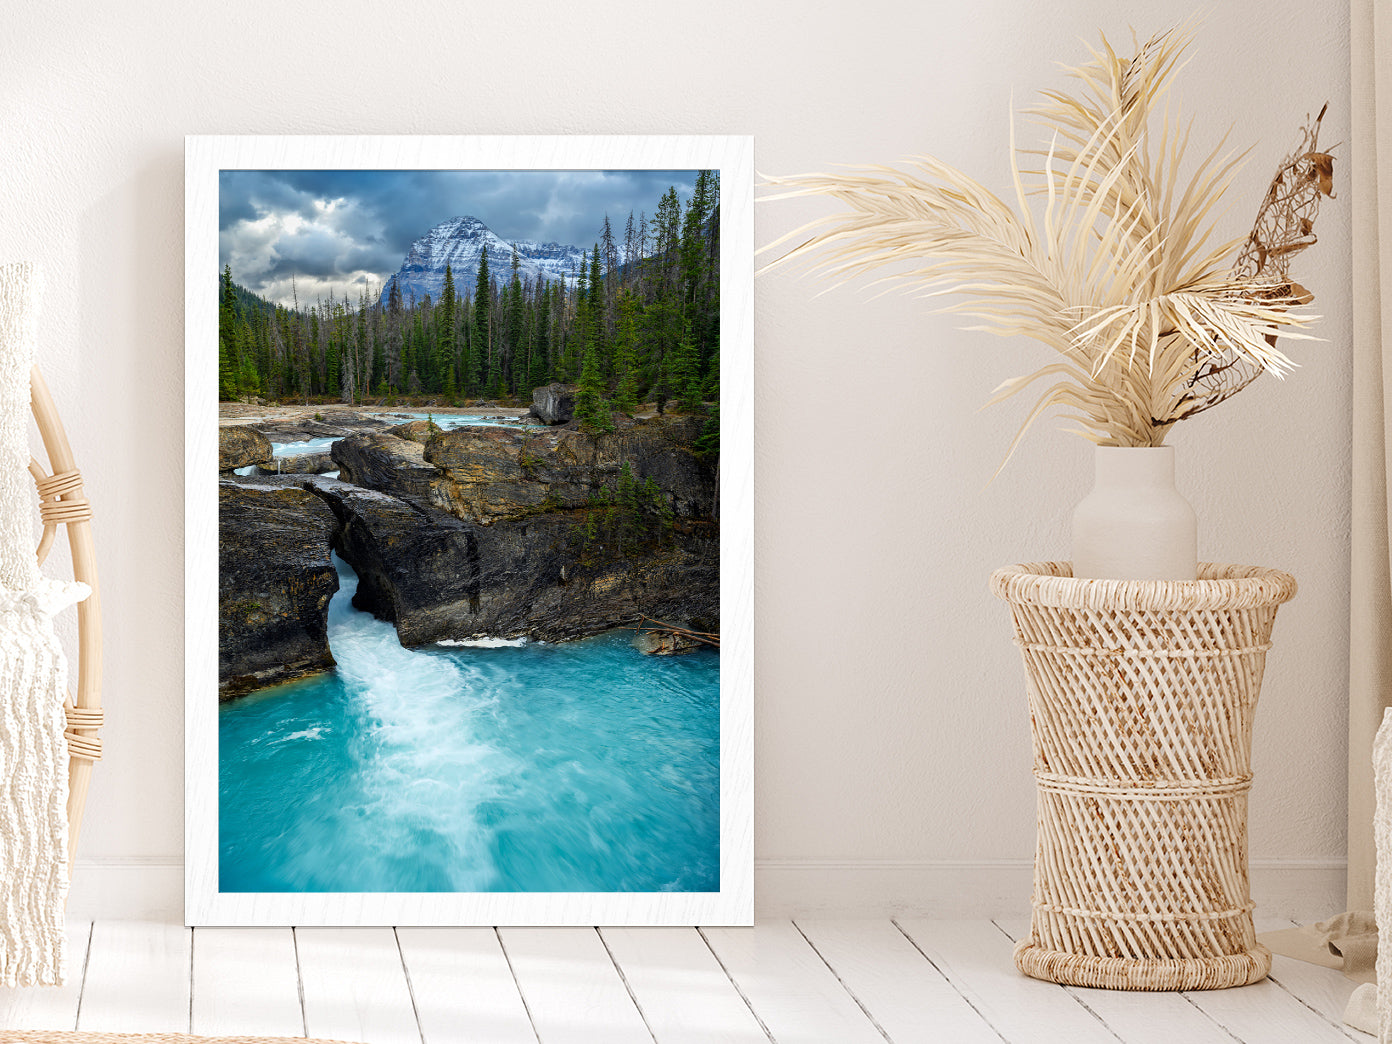 River Flows Down From Mountains Glass Framed Wall Art, Ready to Hang Quality Print Without White Border White